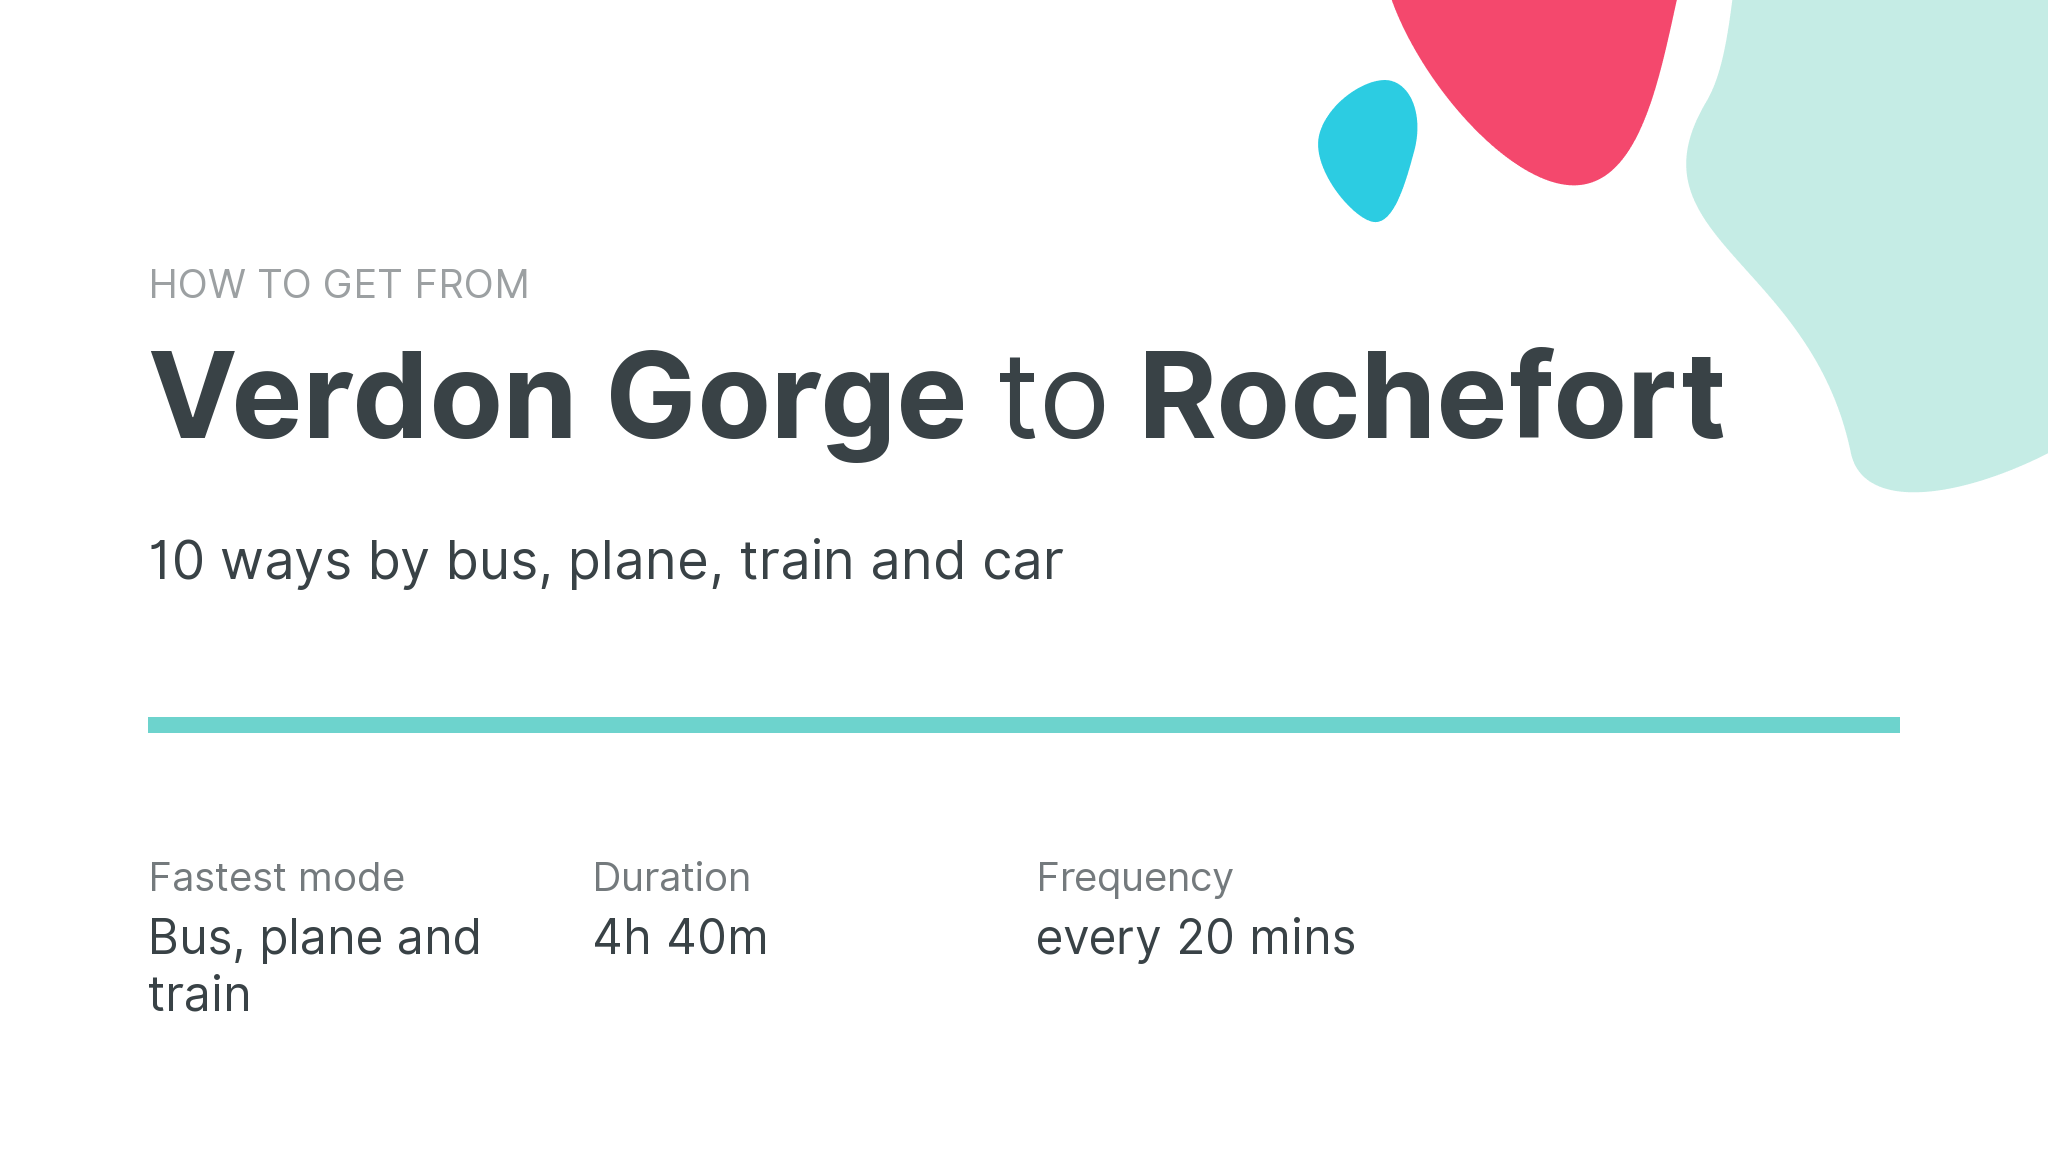 How do I get from Verdon Gorge to Rochefort